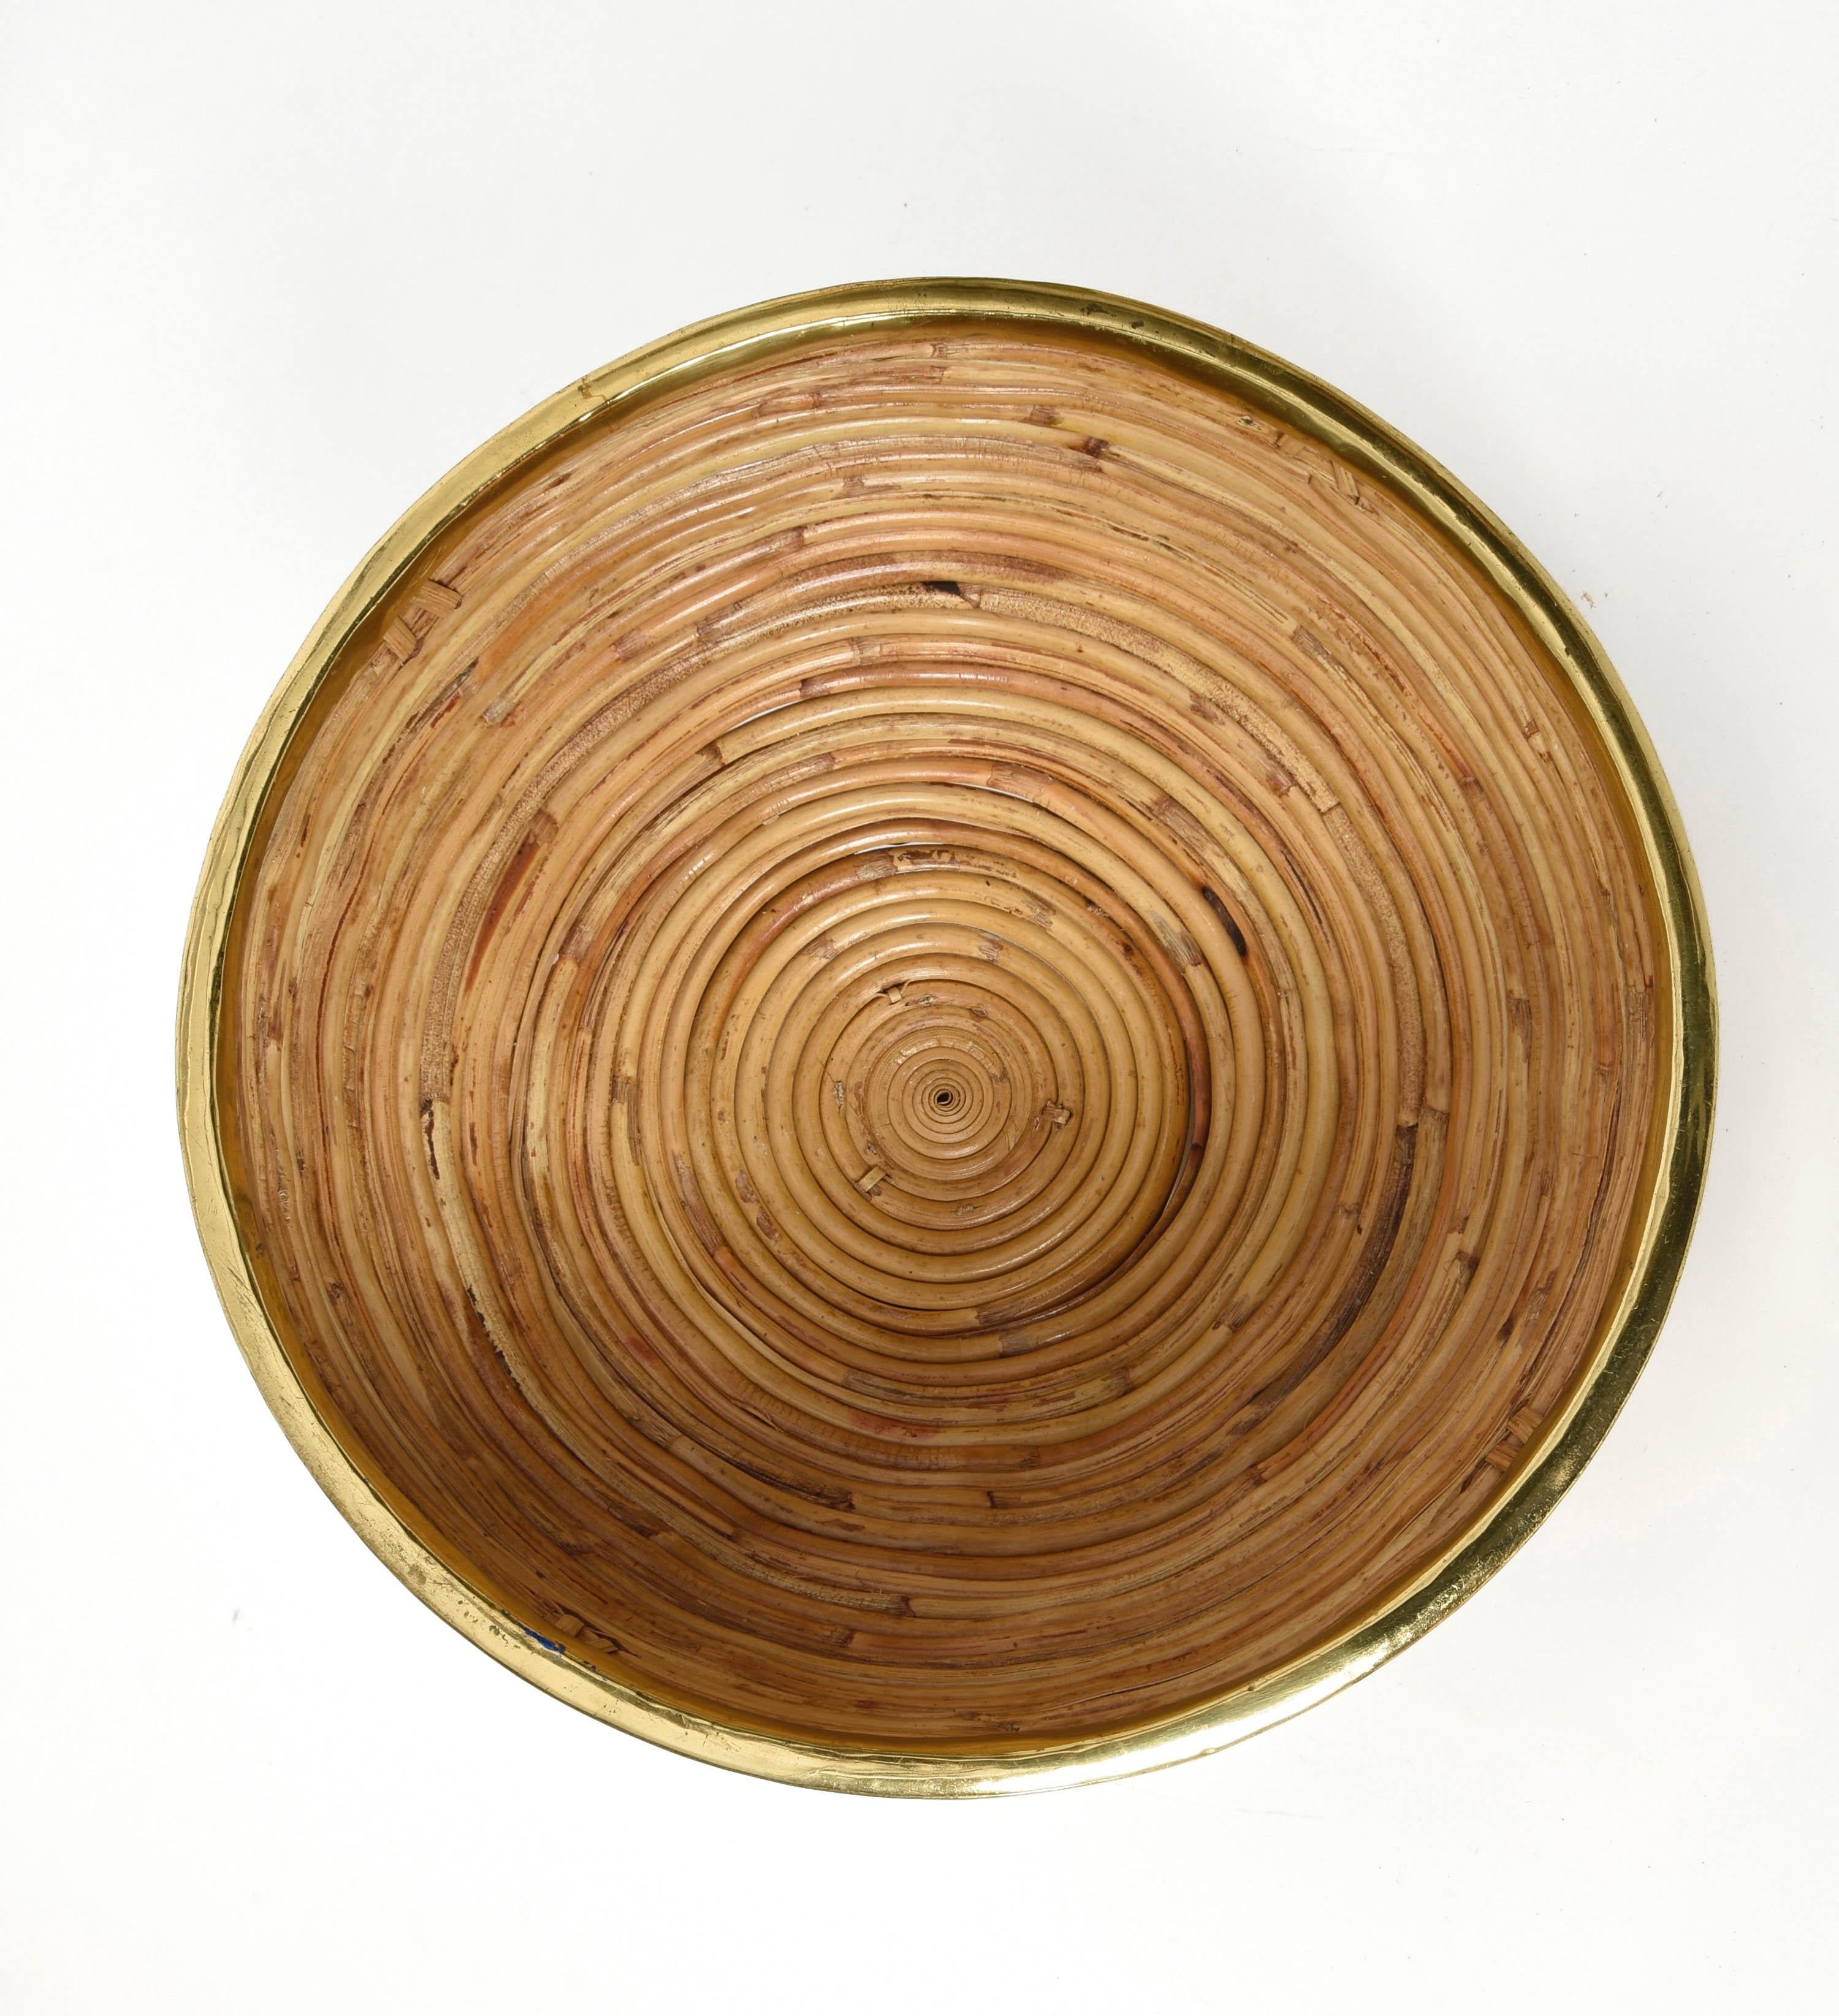 Spectacular midcentury round rattan and brass decorative centrepiece basket. This fantastic piece was designed in Italy during the 1970s.

This wonderful piece is unique because of the concentric round rattan with an amazing and elegant brass